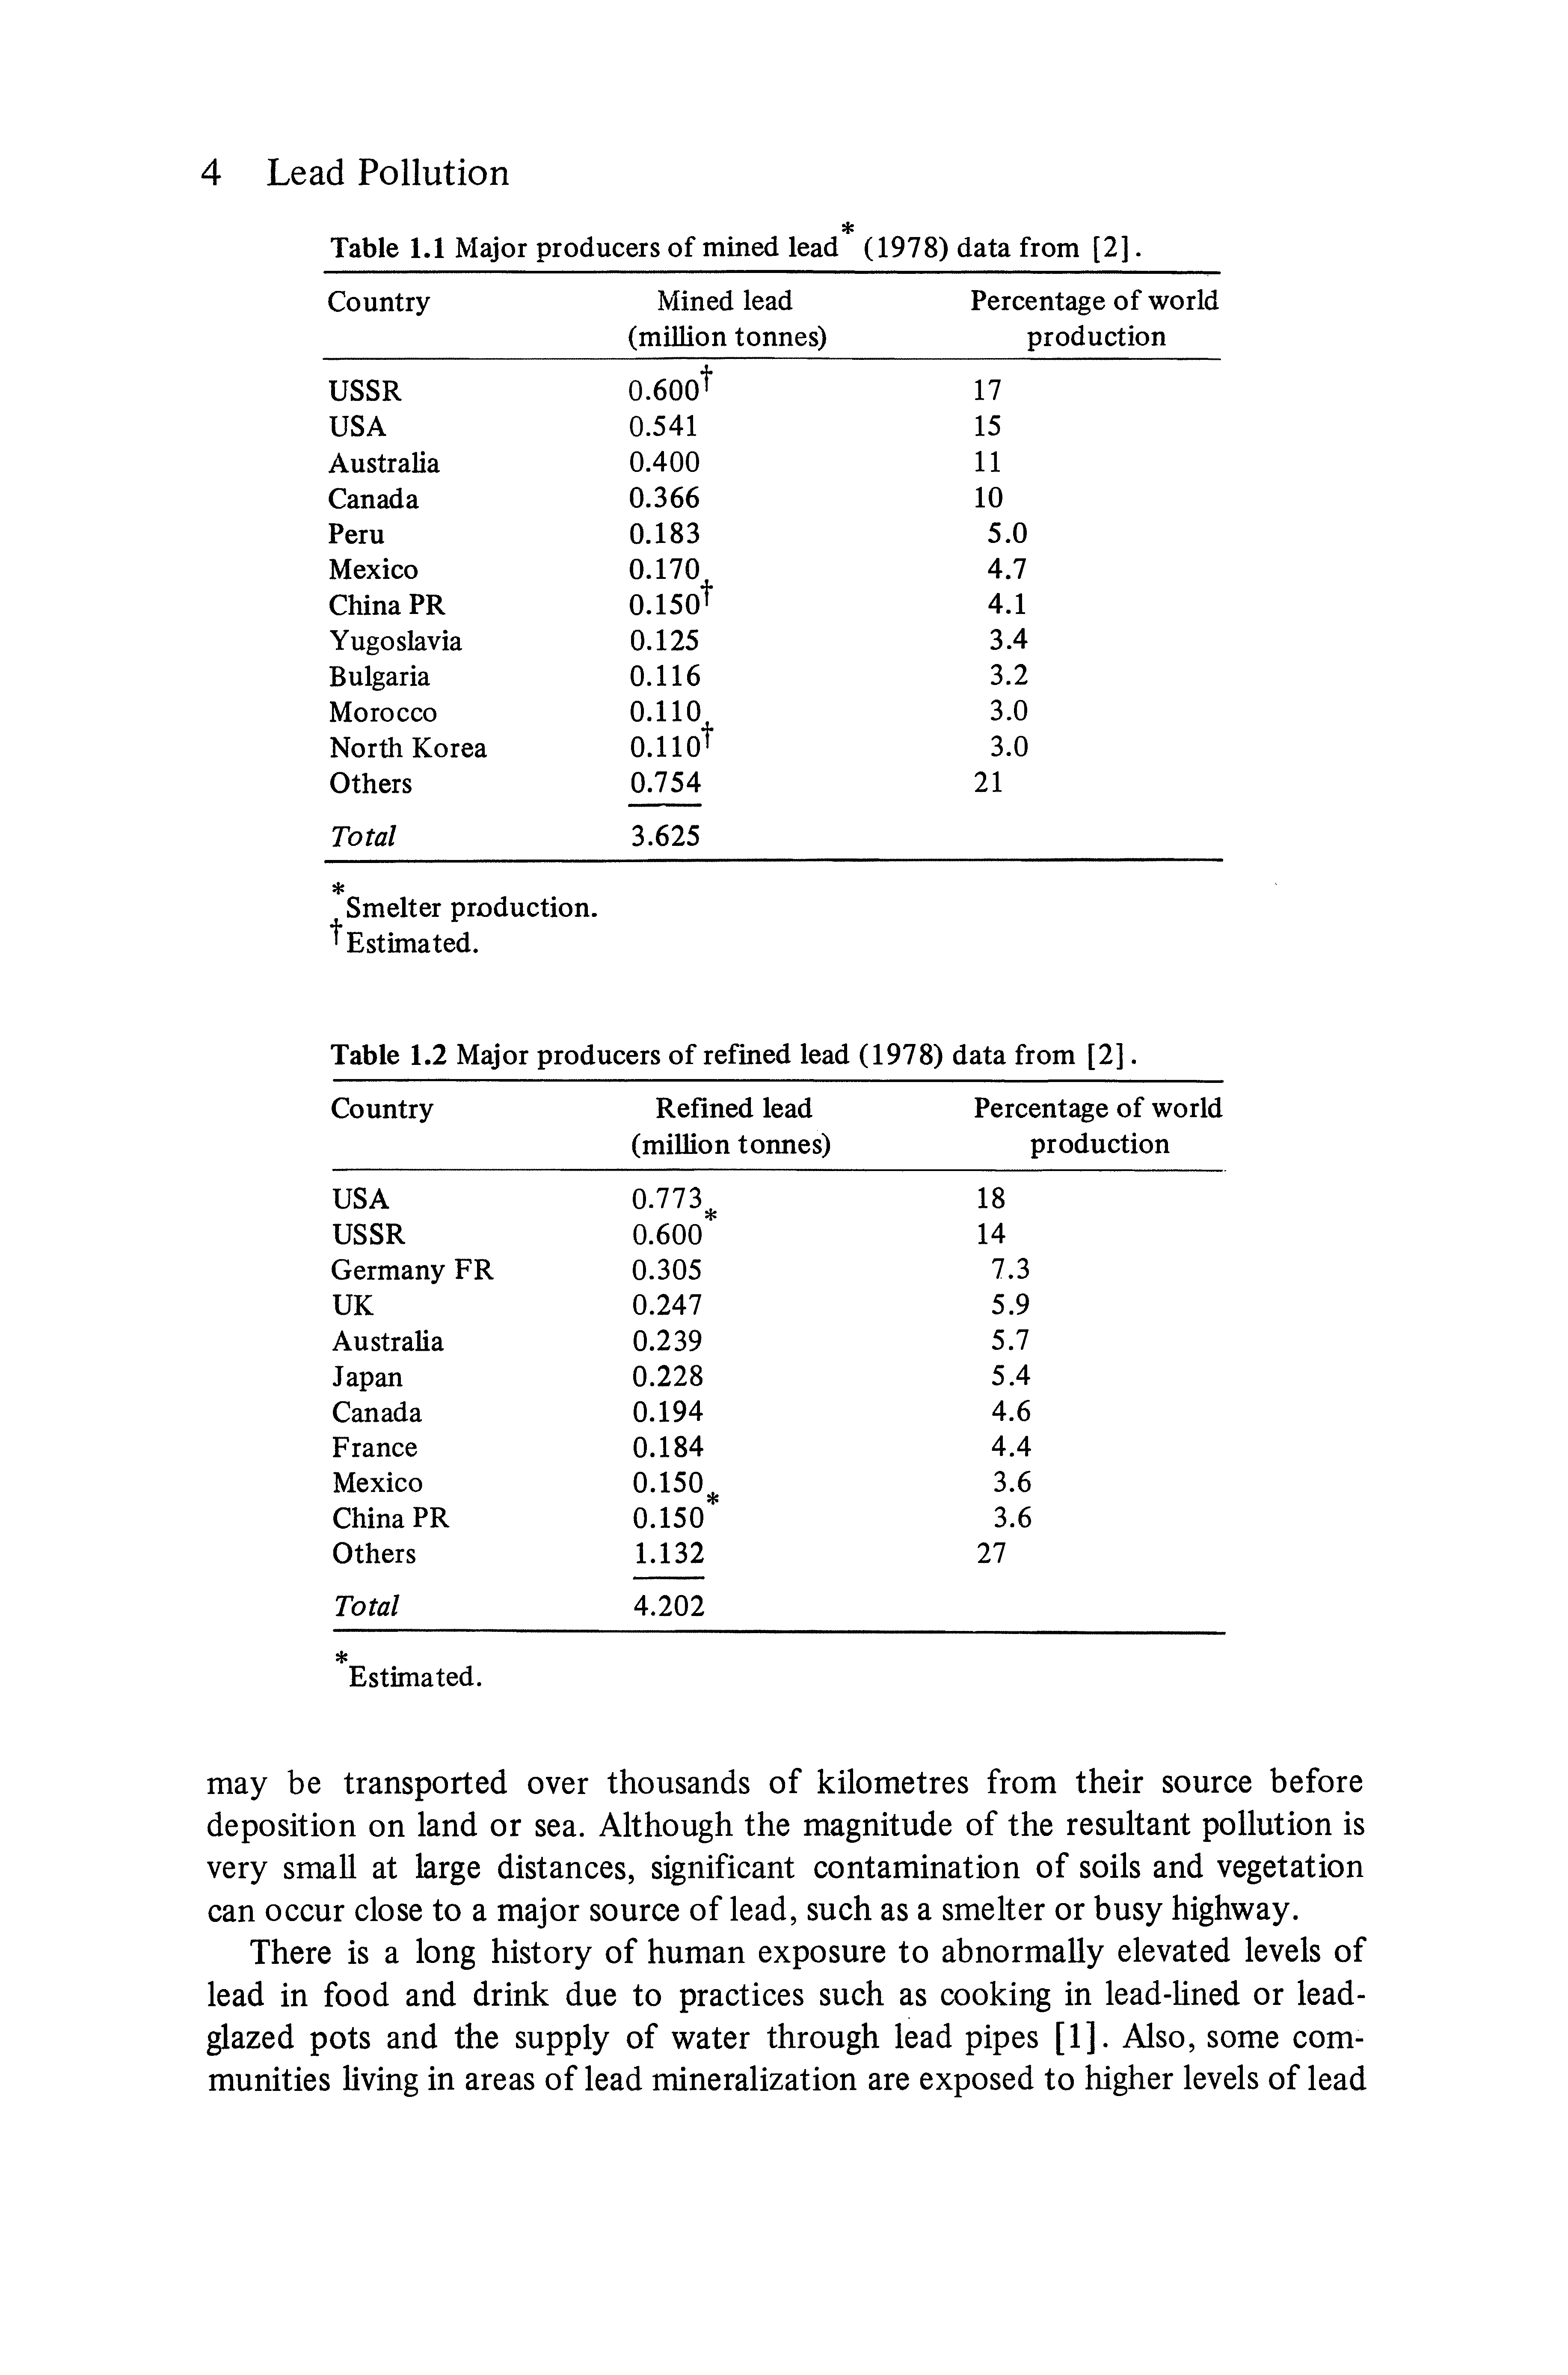 Table 1.1 Major producers of mined lead (1978) data from [2].